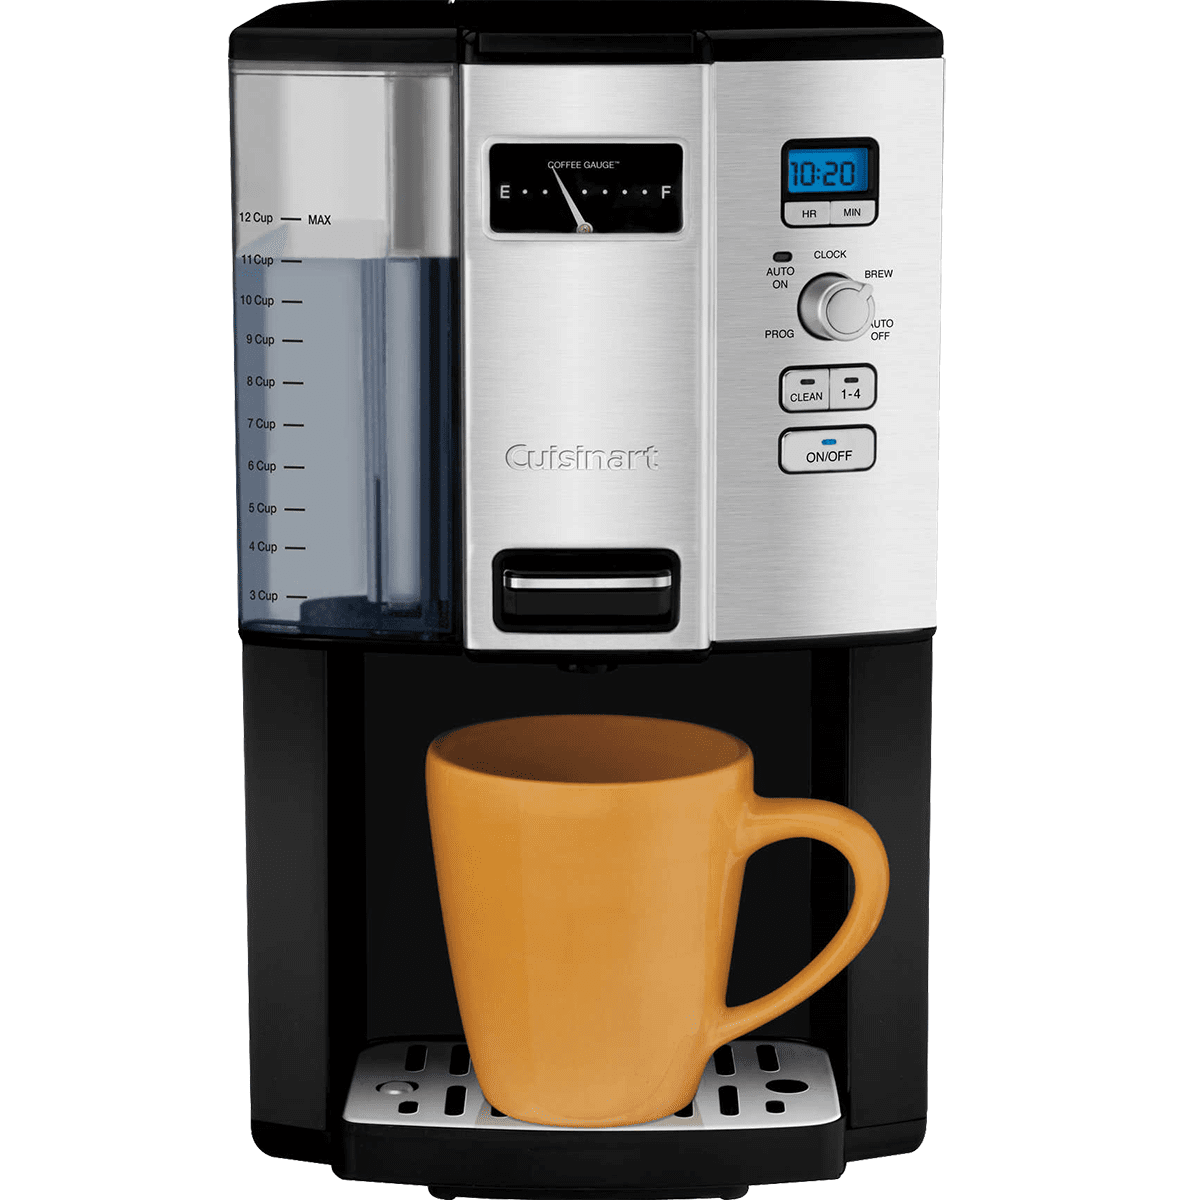 Cuisinart Coffee On Demand 12 Cup Programmable Coffee Maker (dcc-3000)